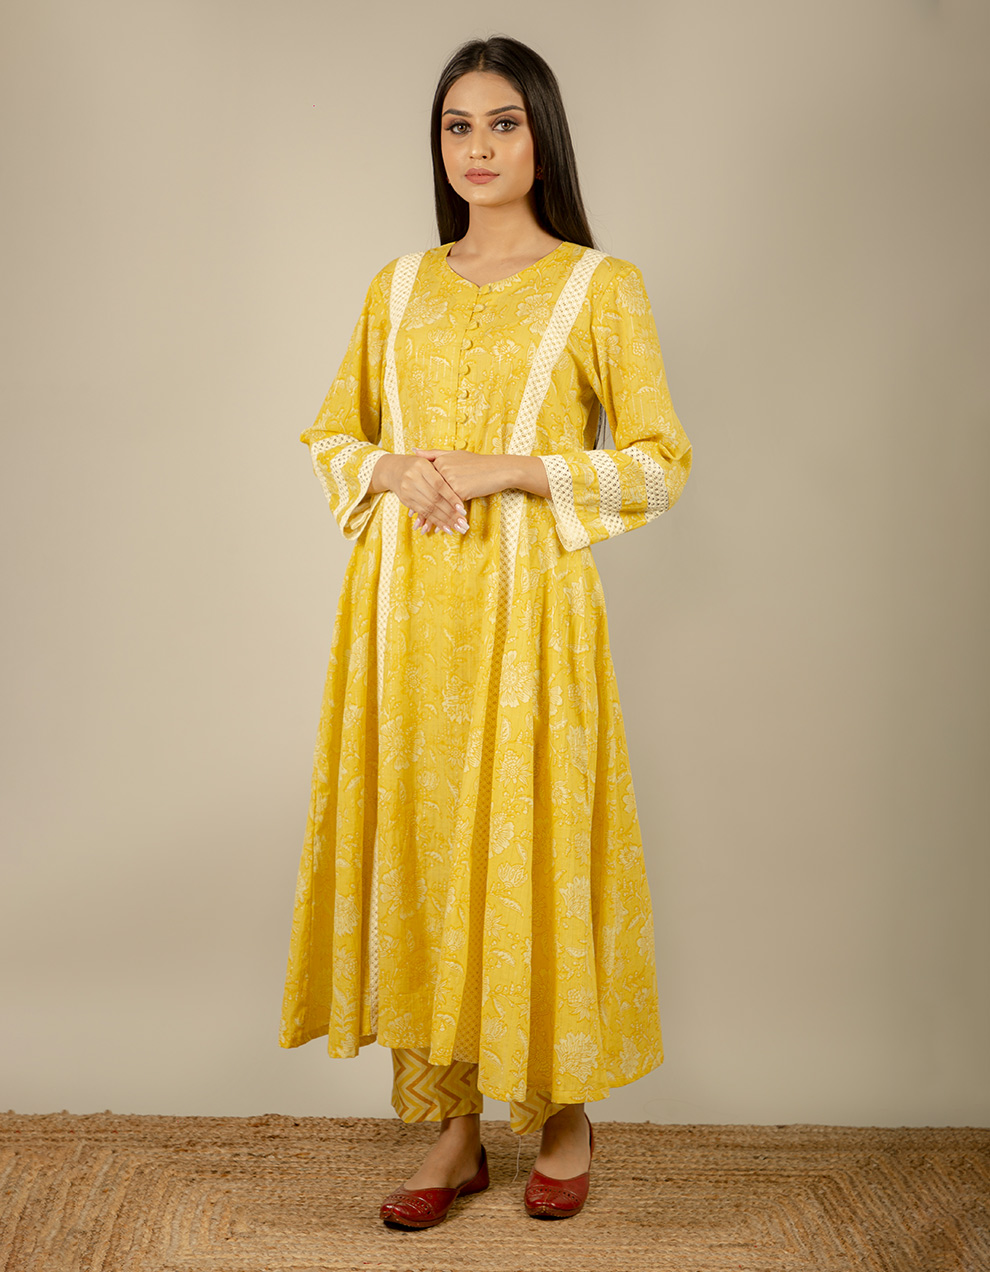 Find-the-beautiful-yellow-cotton-printed-kurta-designs-at-pcl